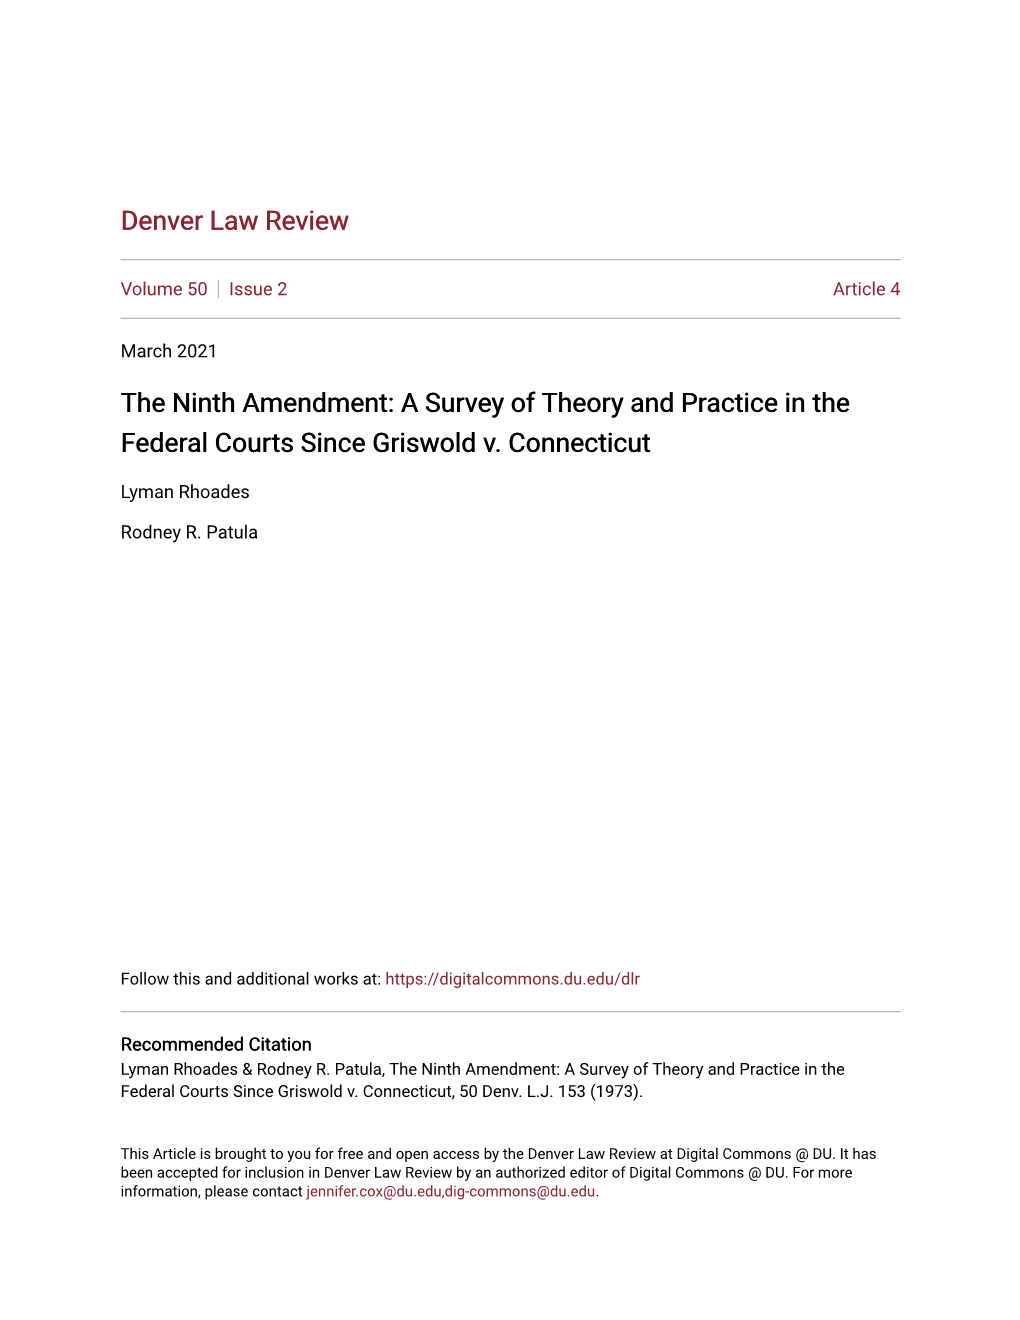 The Ninth Amendment: a Survey of Theory and Practice in the Federal Courts Since Griswold V